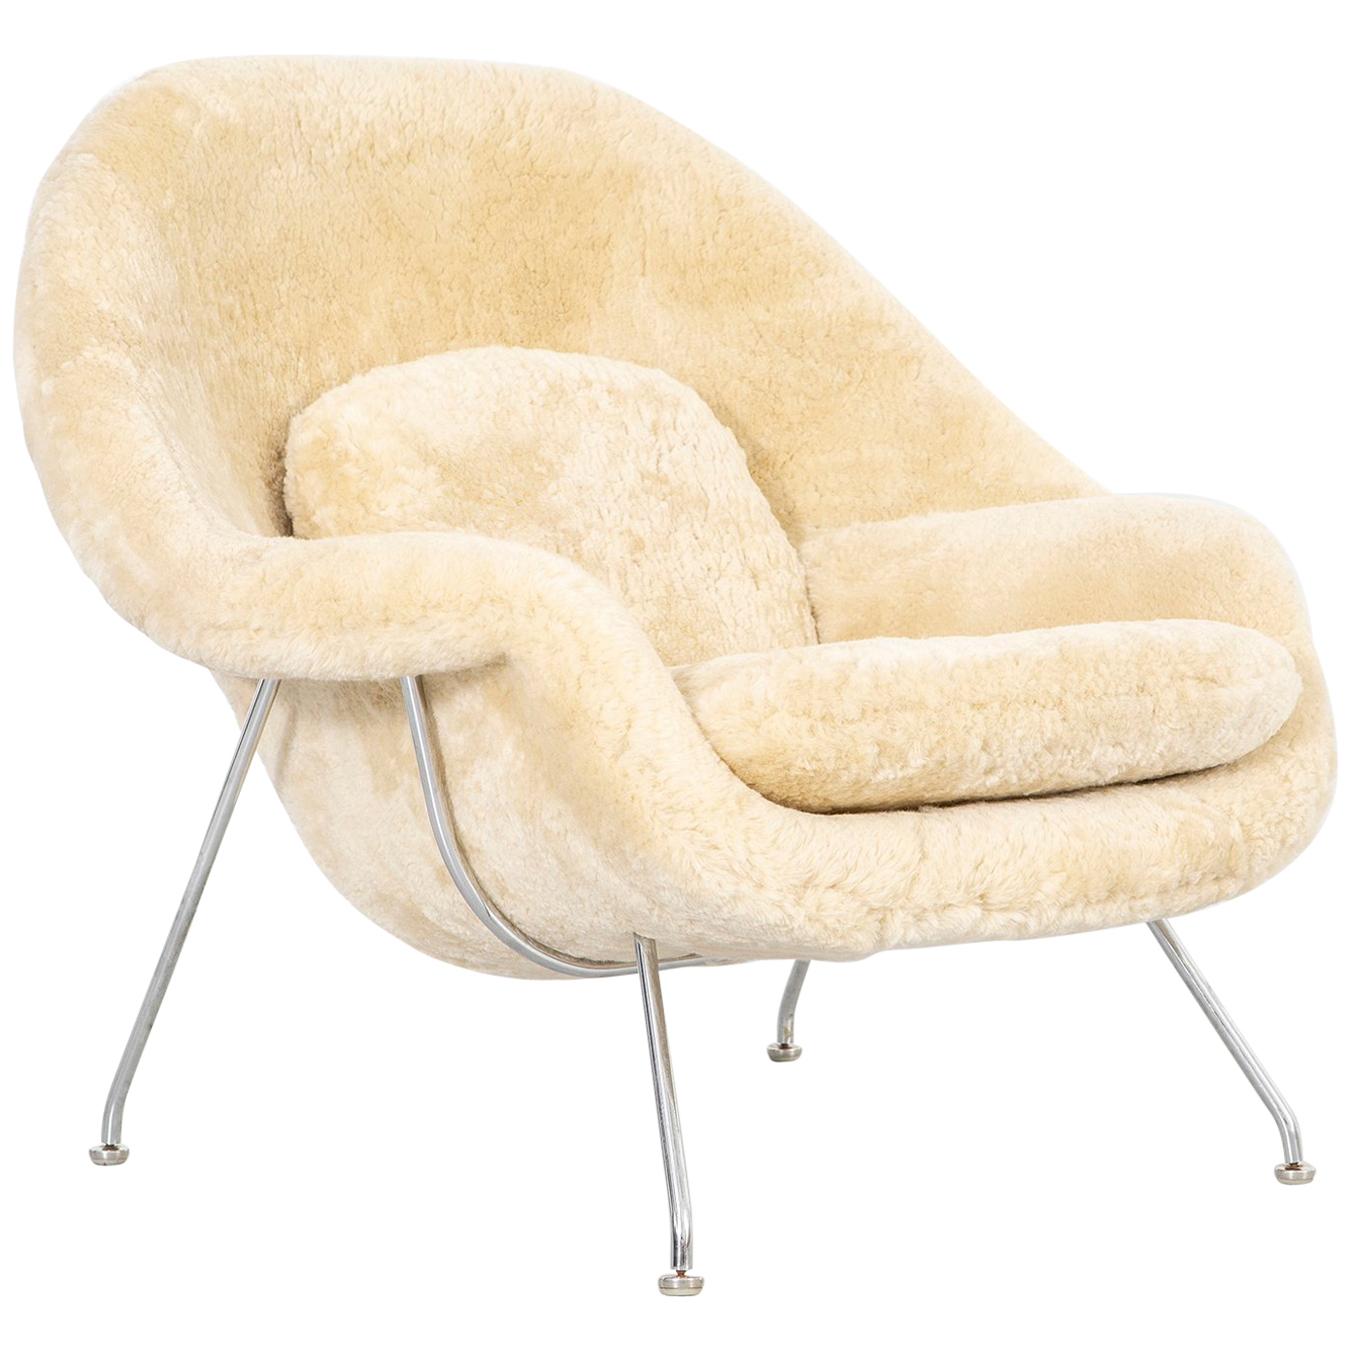 Mid-Century Modern Eero Saarinen for Knoll Womb Chair Reupholstered in Shearling For Sale